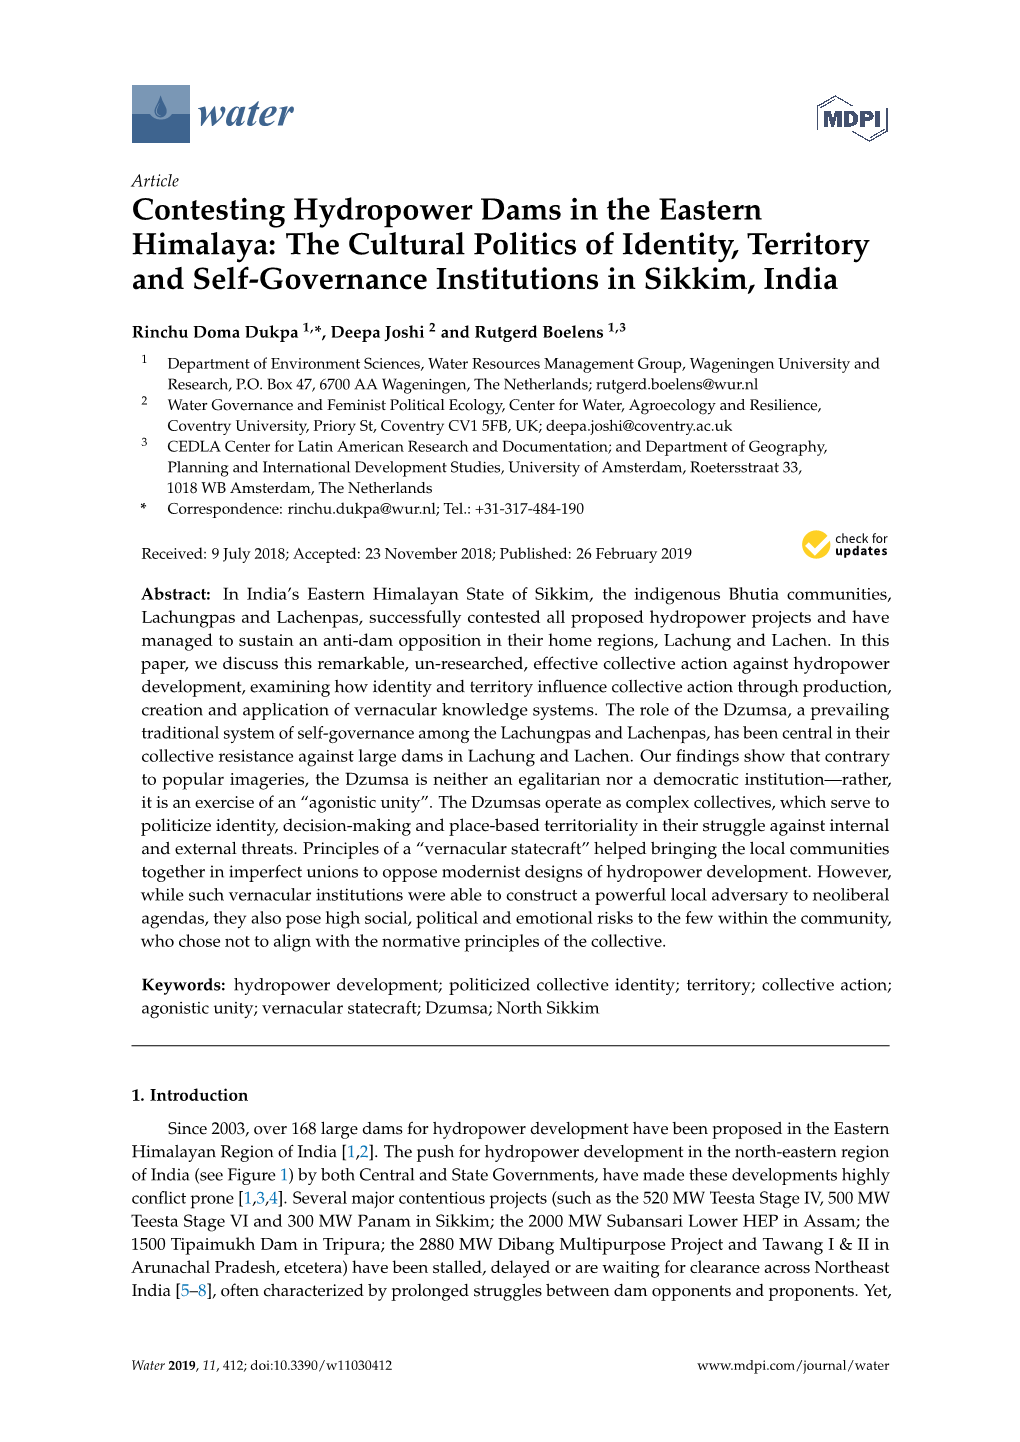 The Cultural Politics of Identity, Territory and Self-Governance Institutions in Sikkim, India